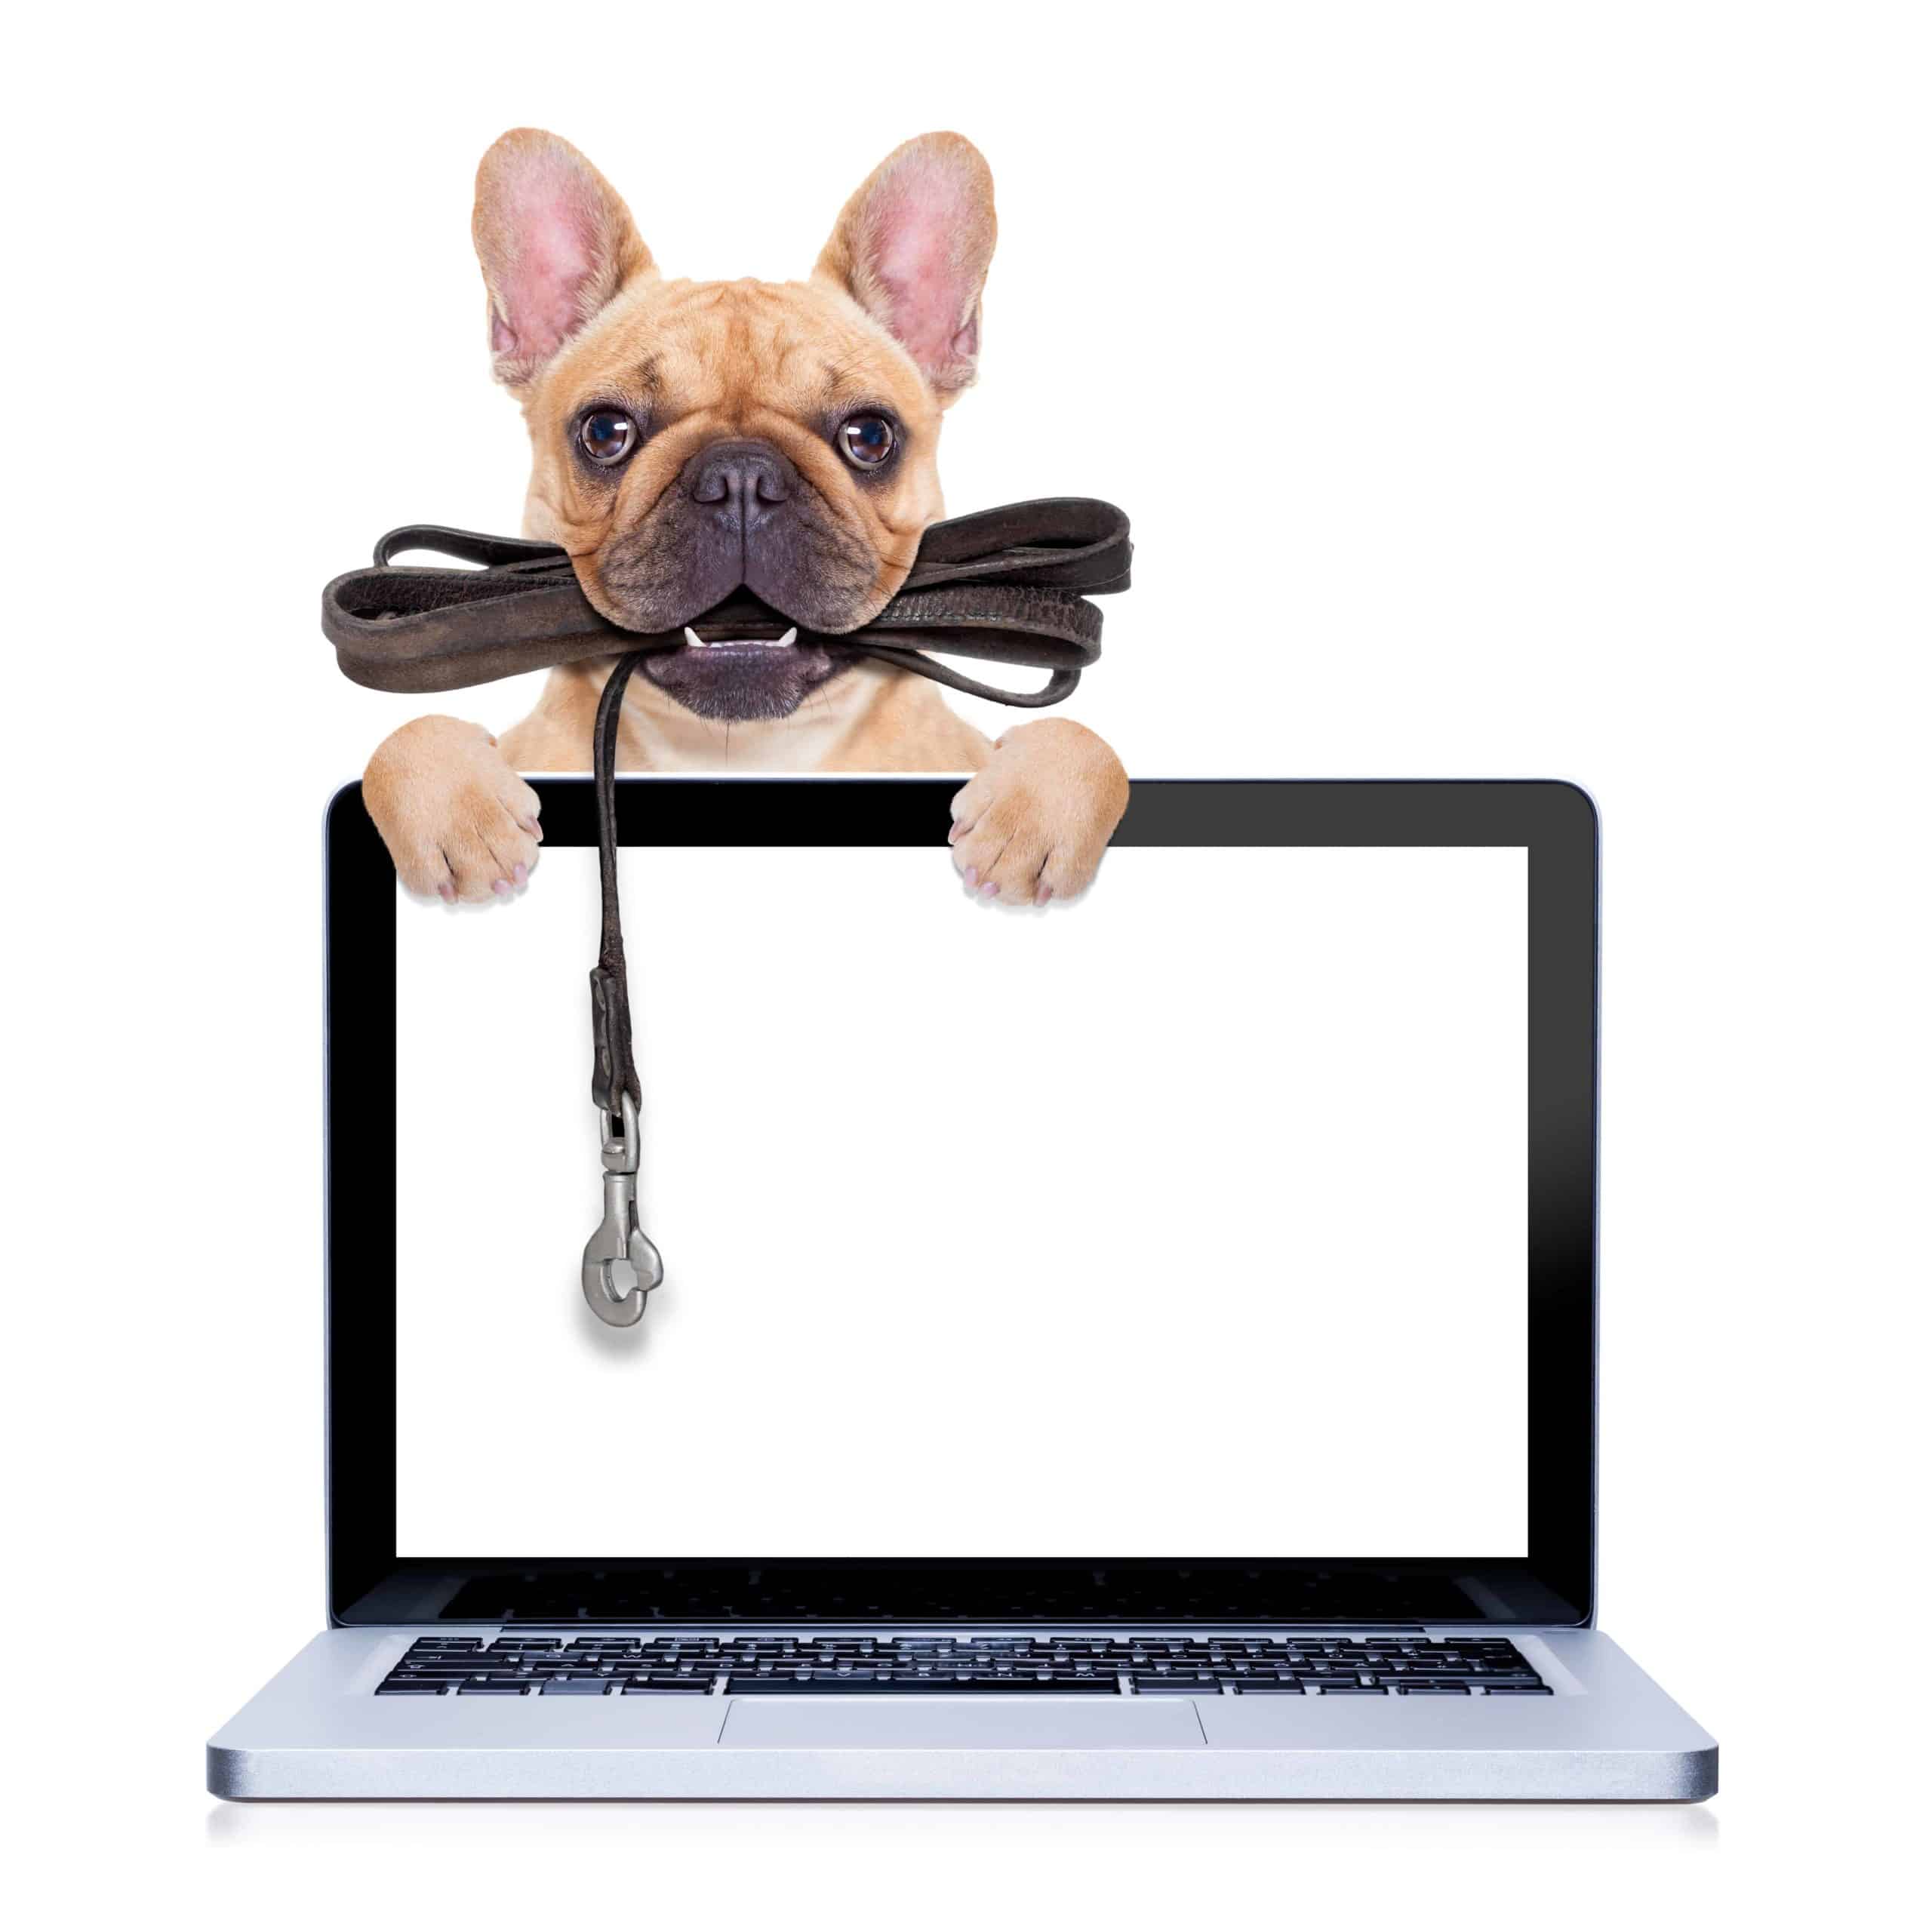 French bulldog puppy with leash leans on laptop. During virtual pet training, trainers provide interactive pet training and learning activities online in private lessons or group classes.